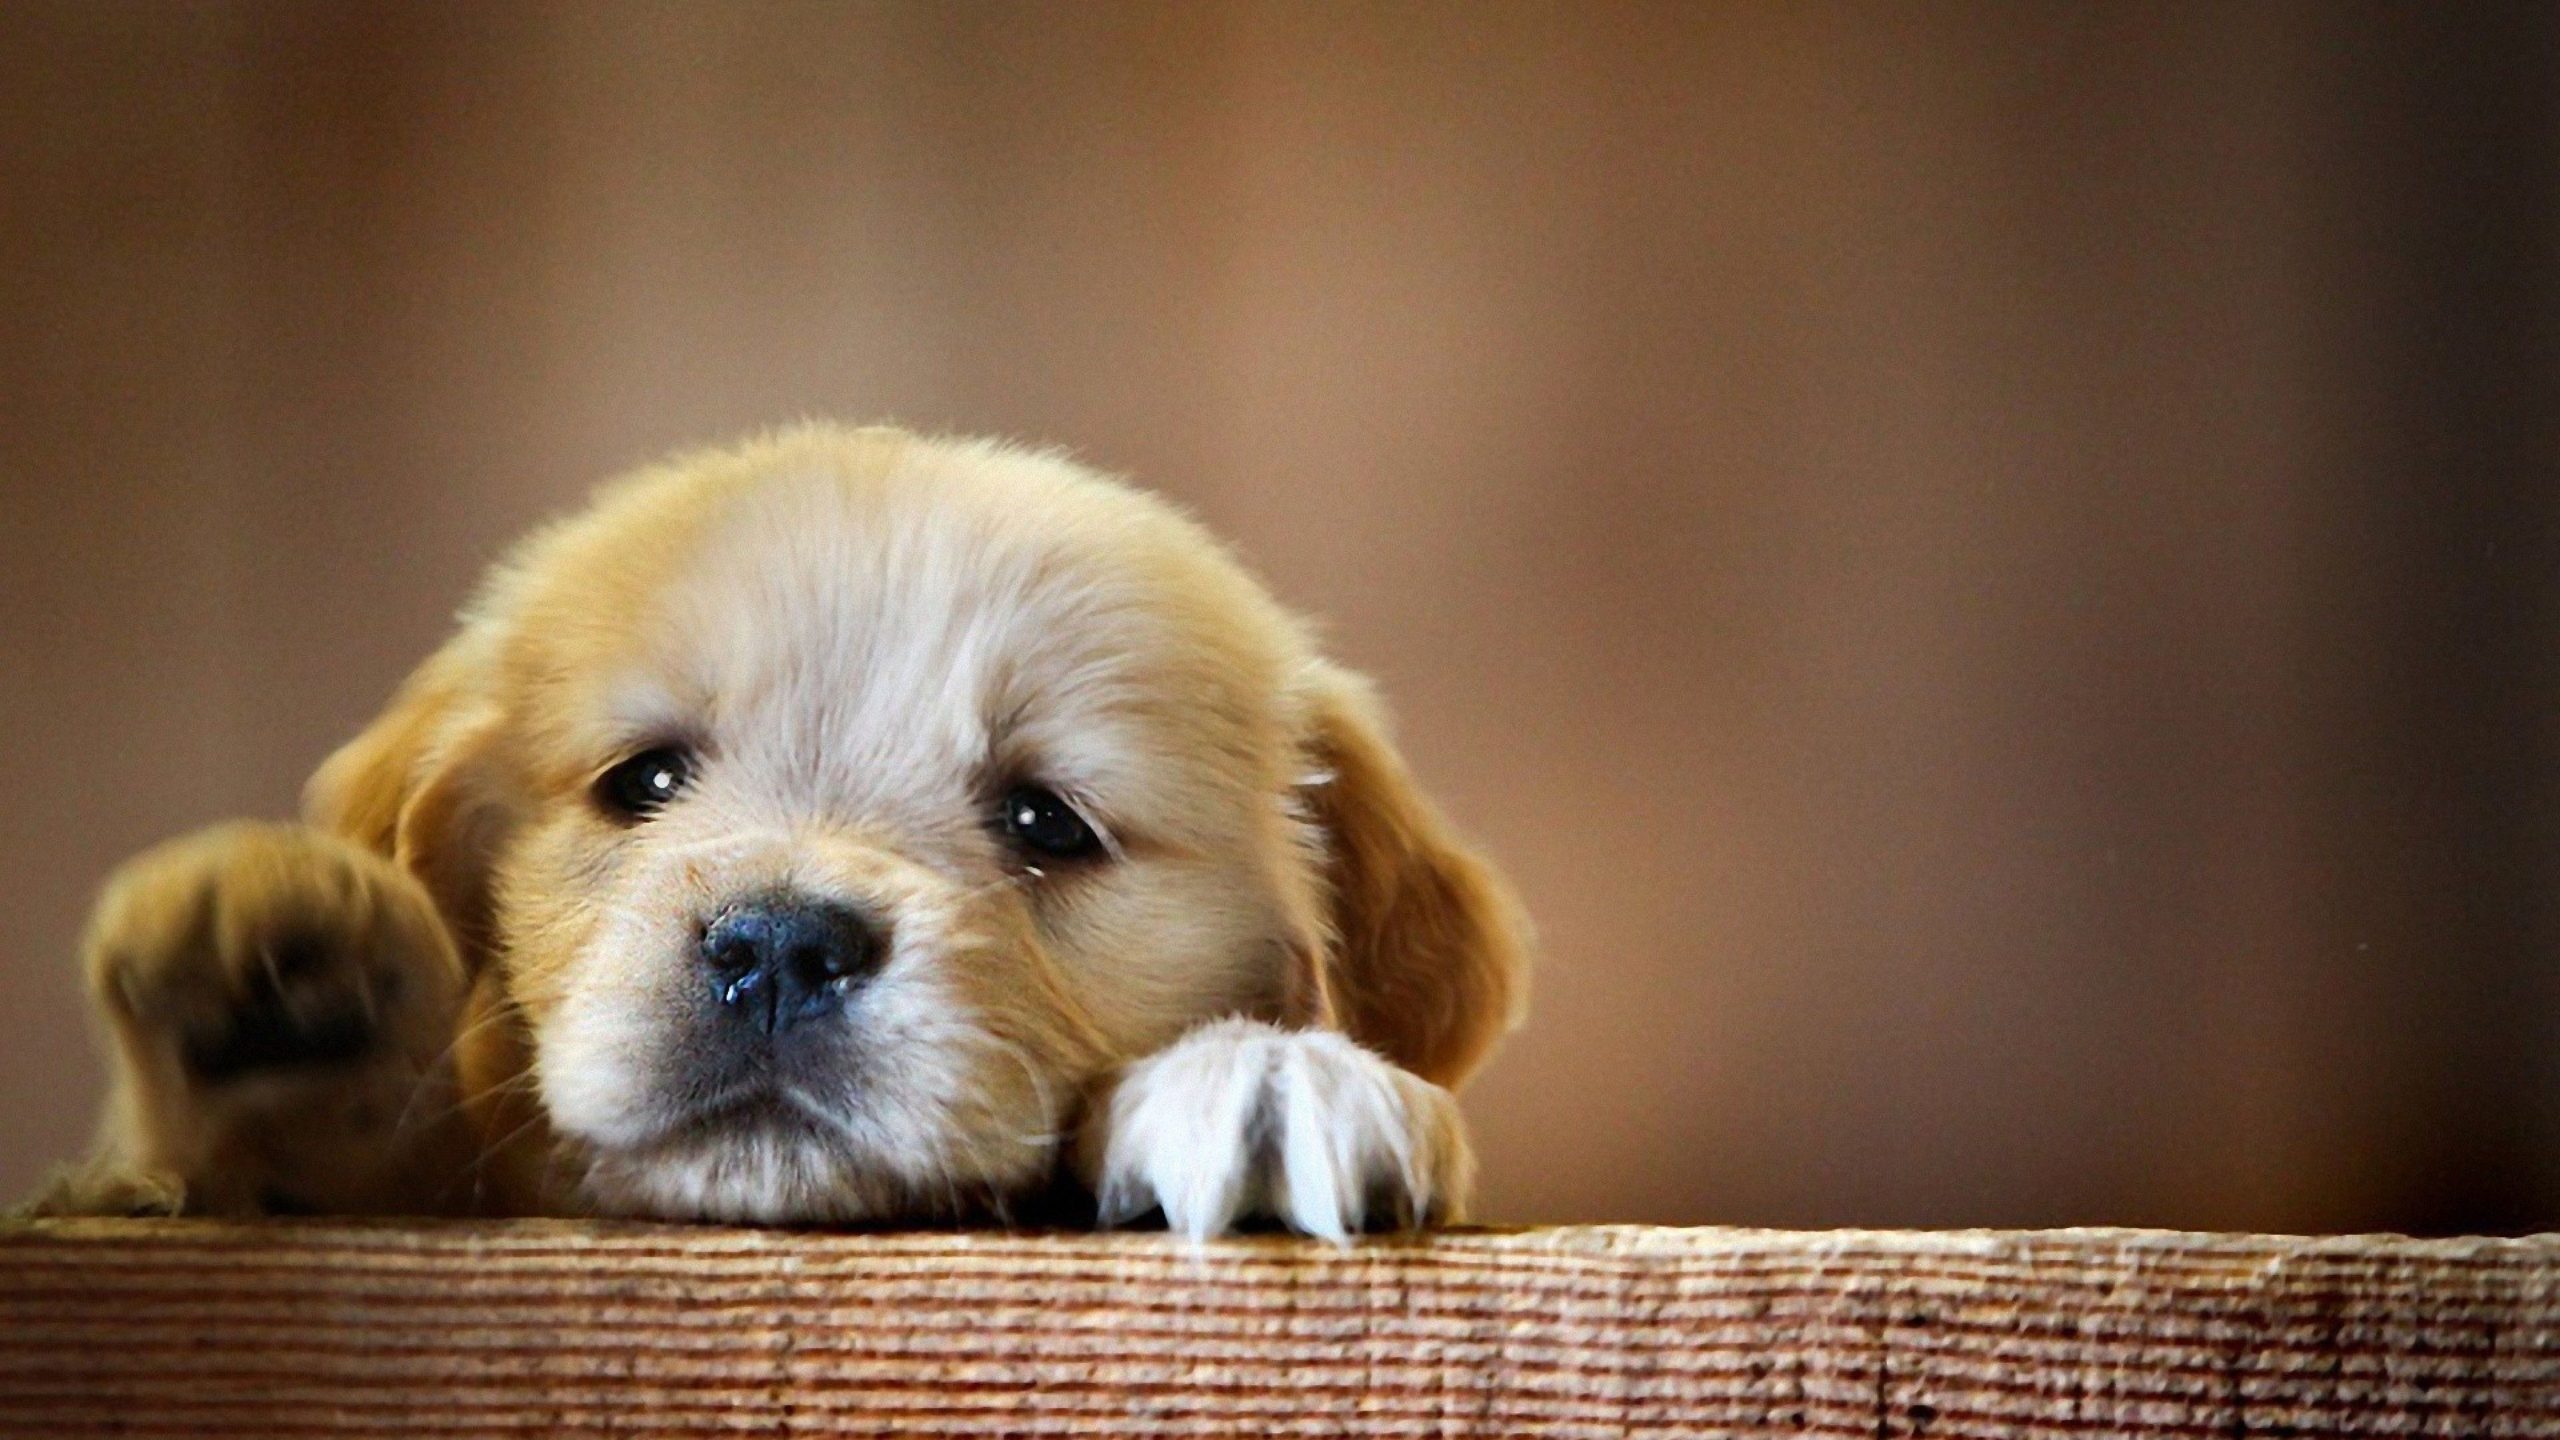 Wallpapers Cute Puppies posted by Sarah Mercado